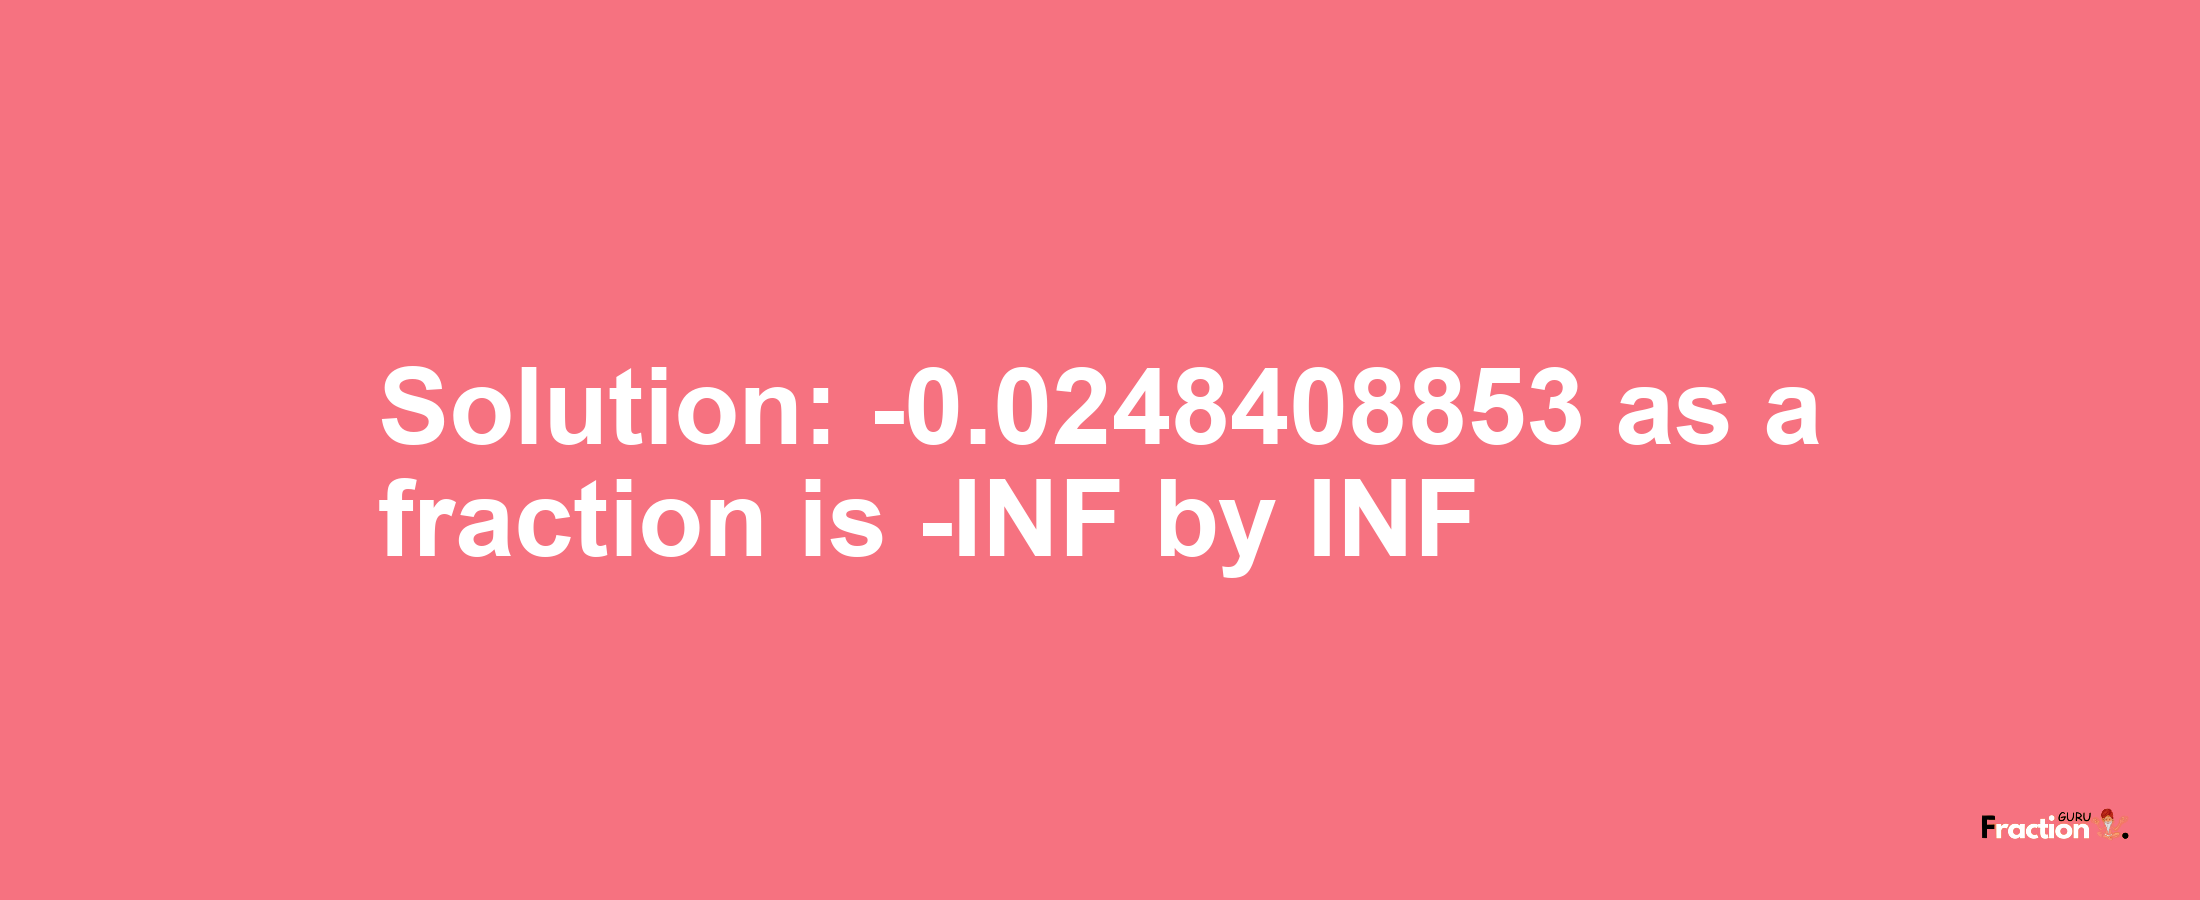 Solution:-0.0248408853 as a fraction is -INF/INF